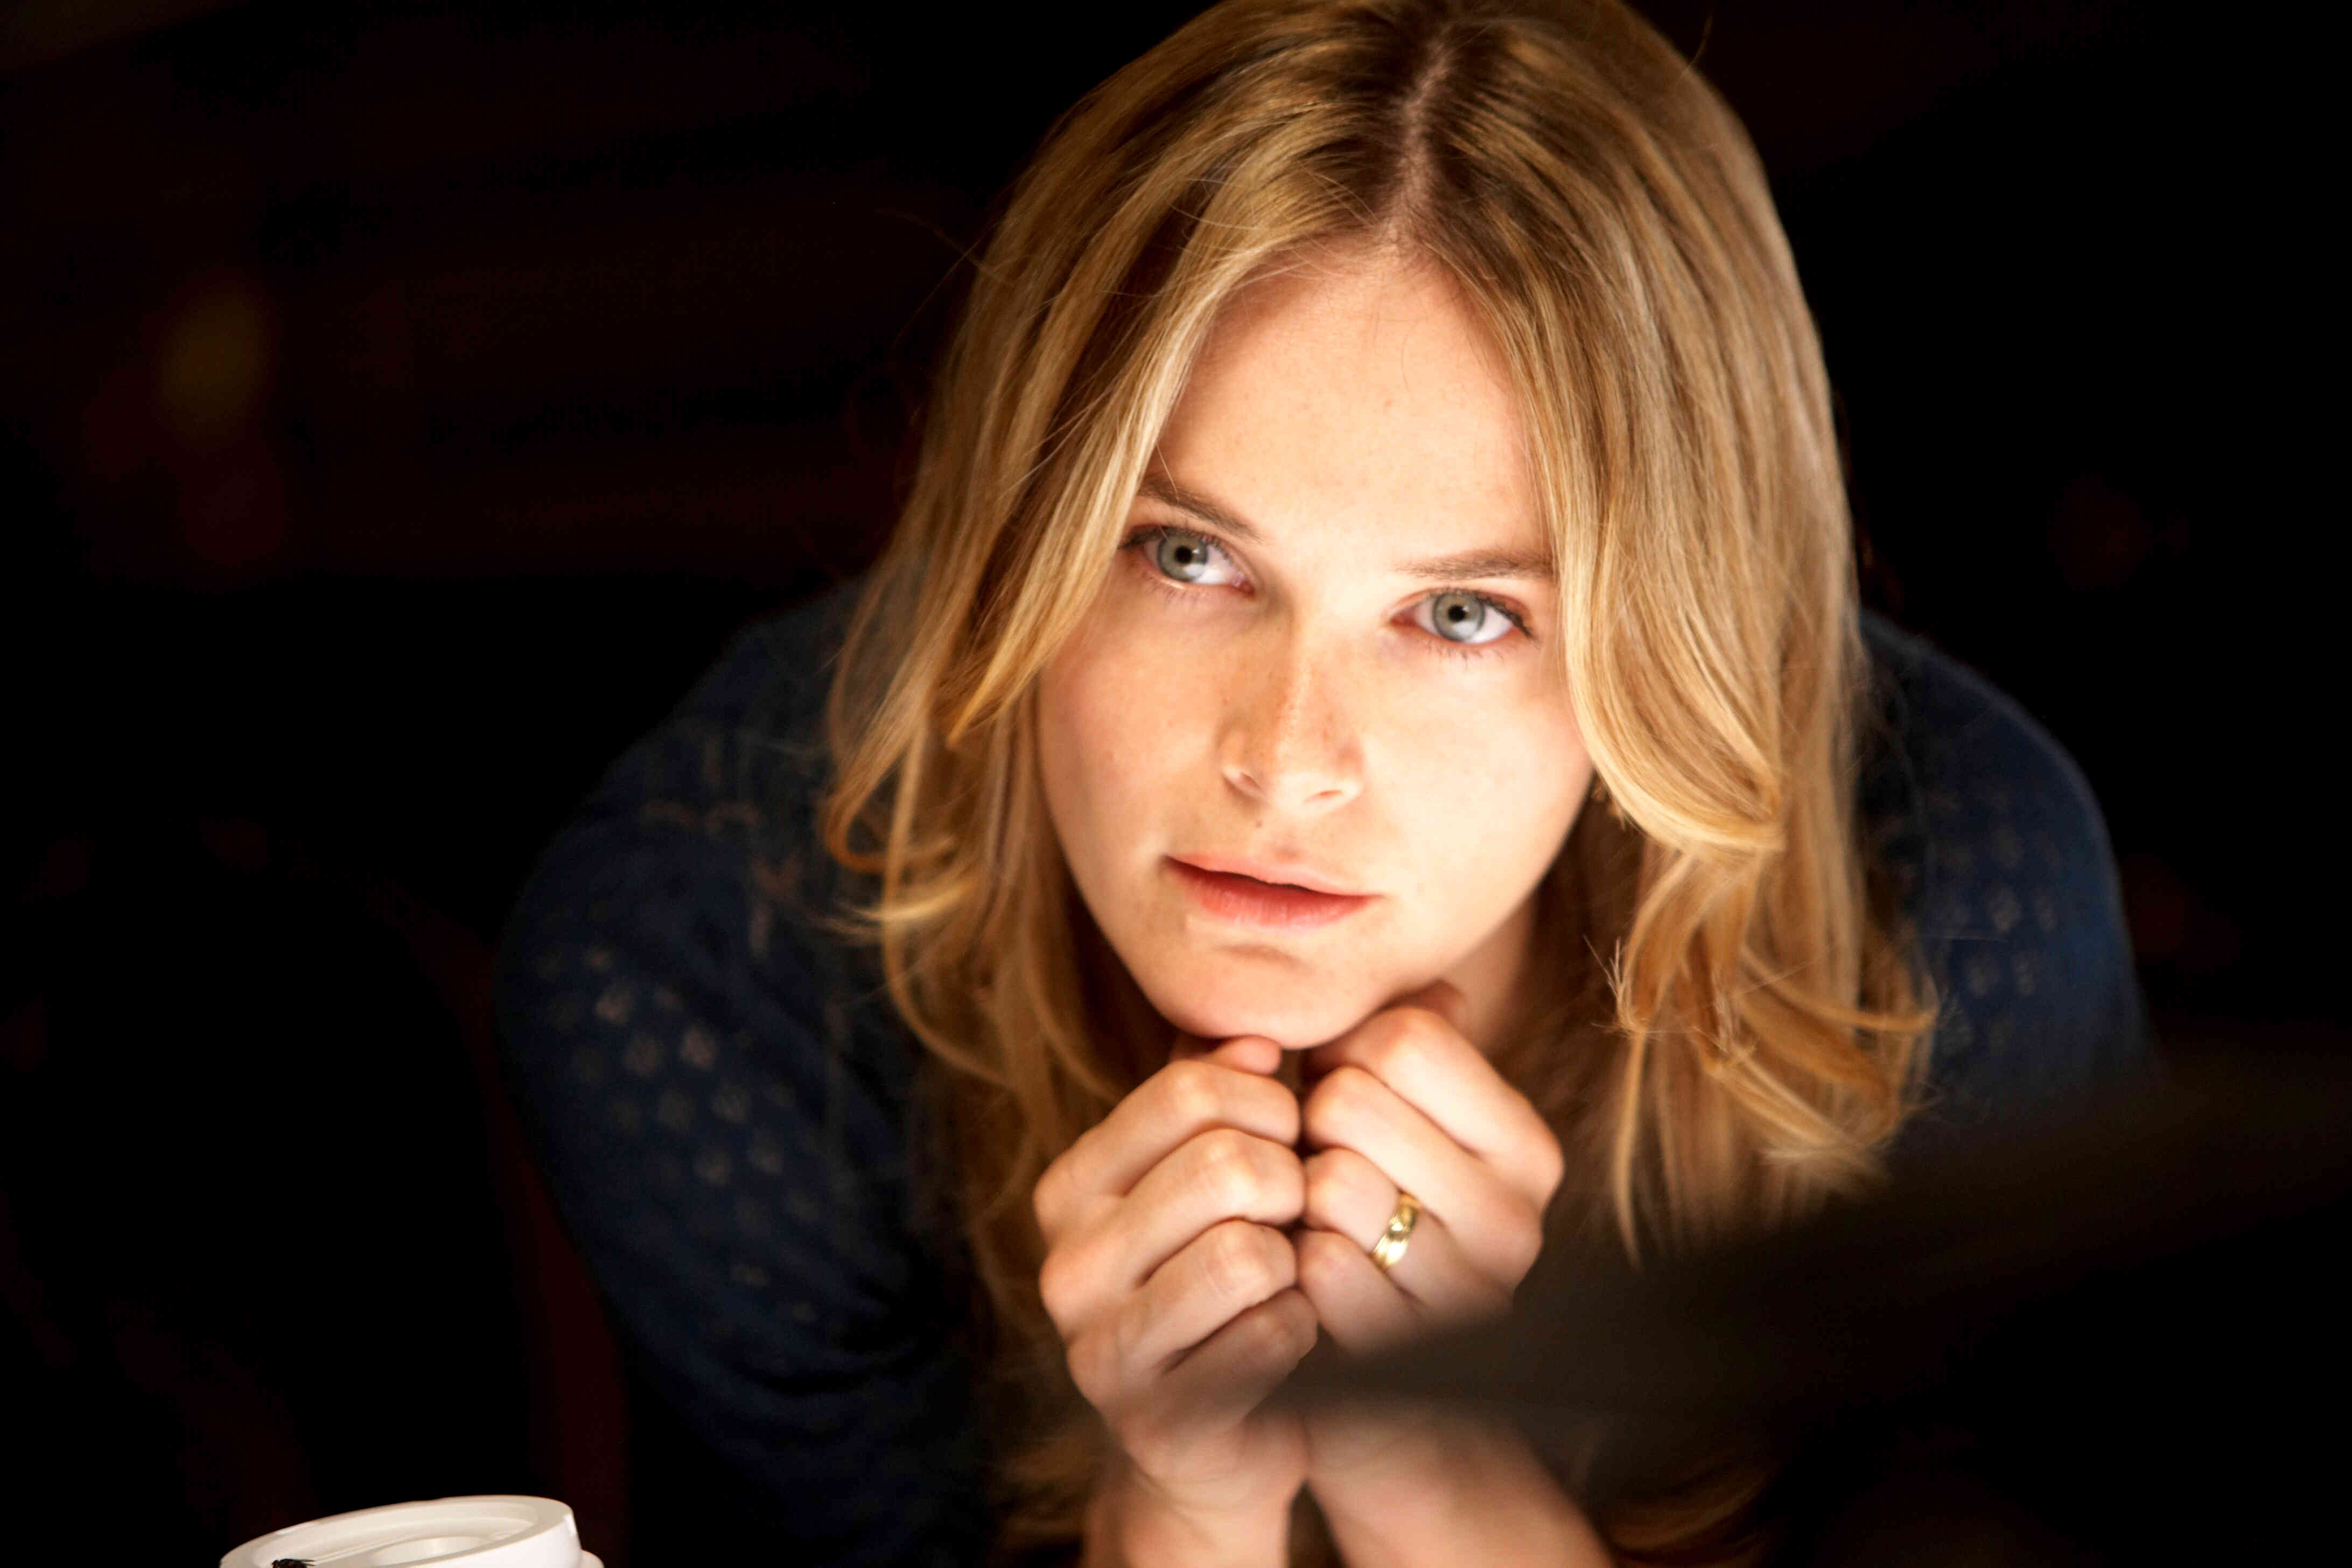 Rachel Blanchard stars as Rachel in Sony Pictures Classics' Adoration (2009). Photo credit by Sophie Giraud.